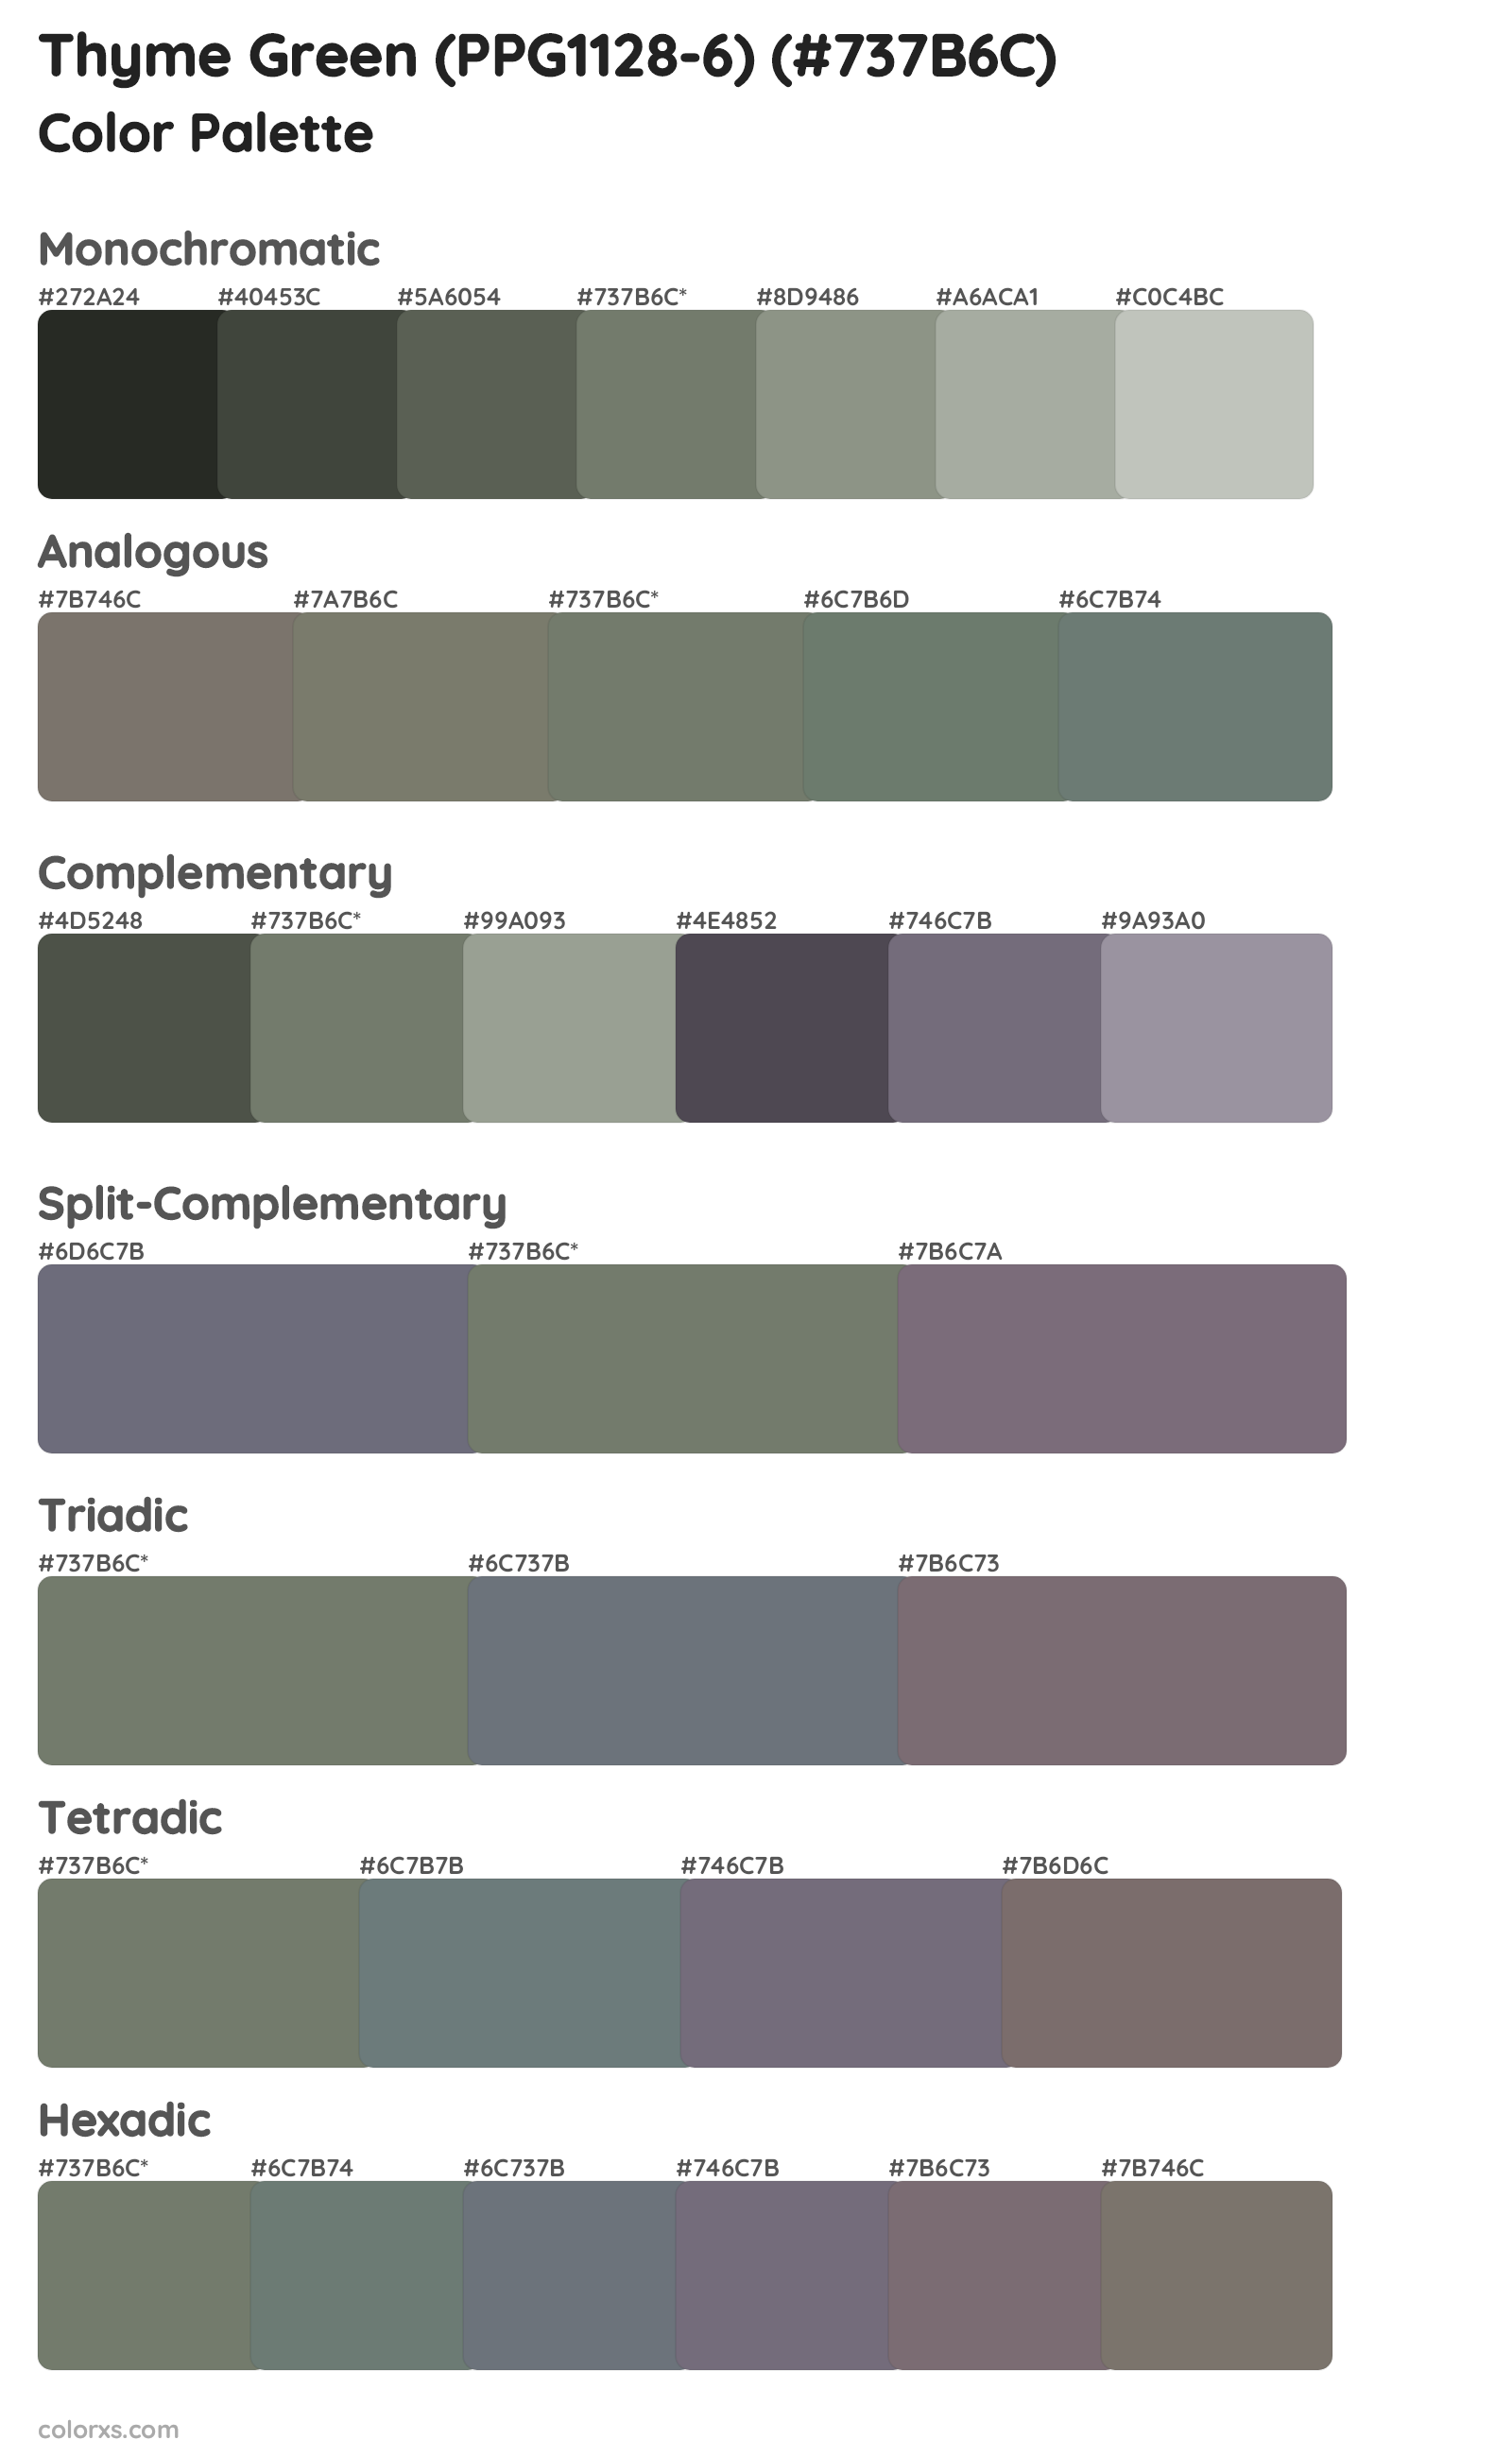 Thyme Green (PPG1128-6) Color Scheme Palettes